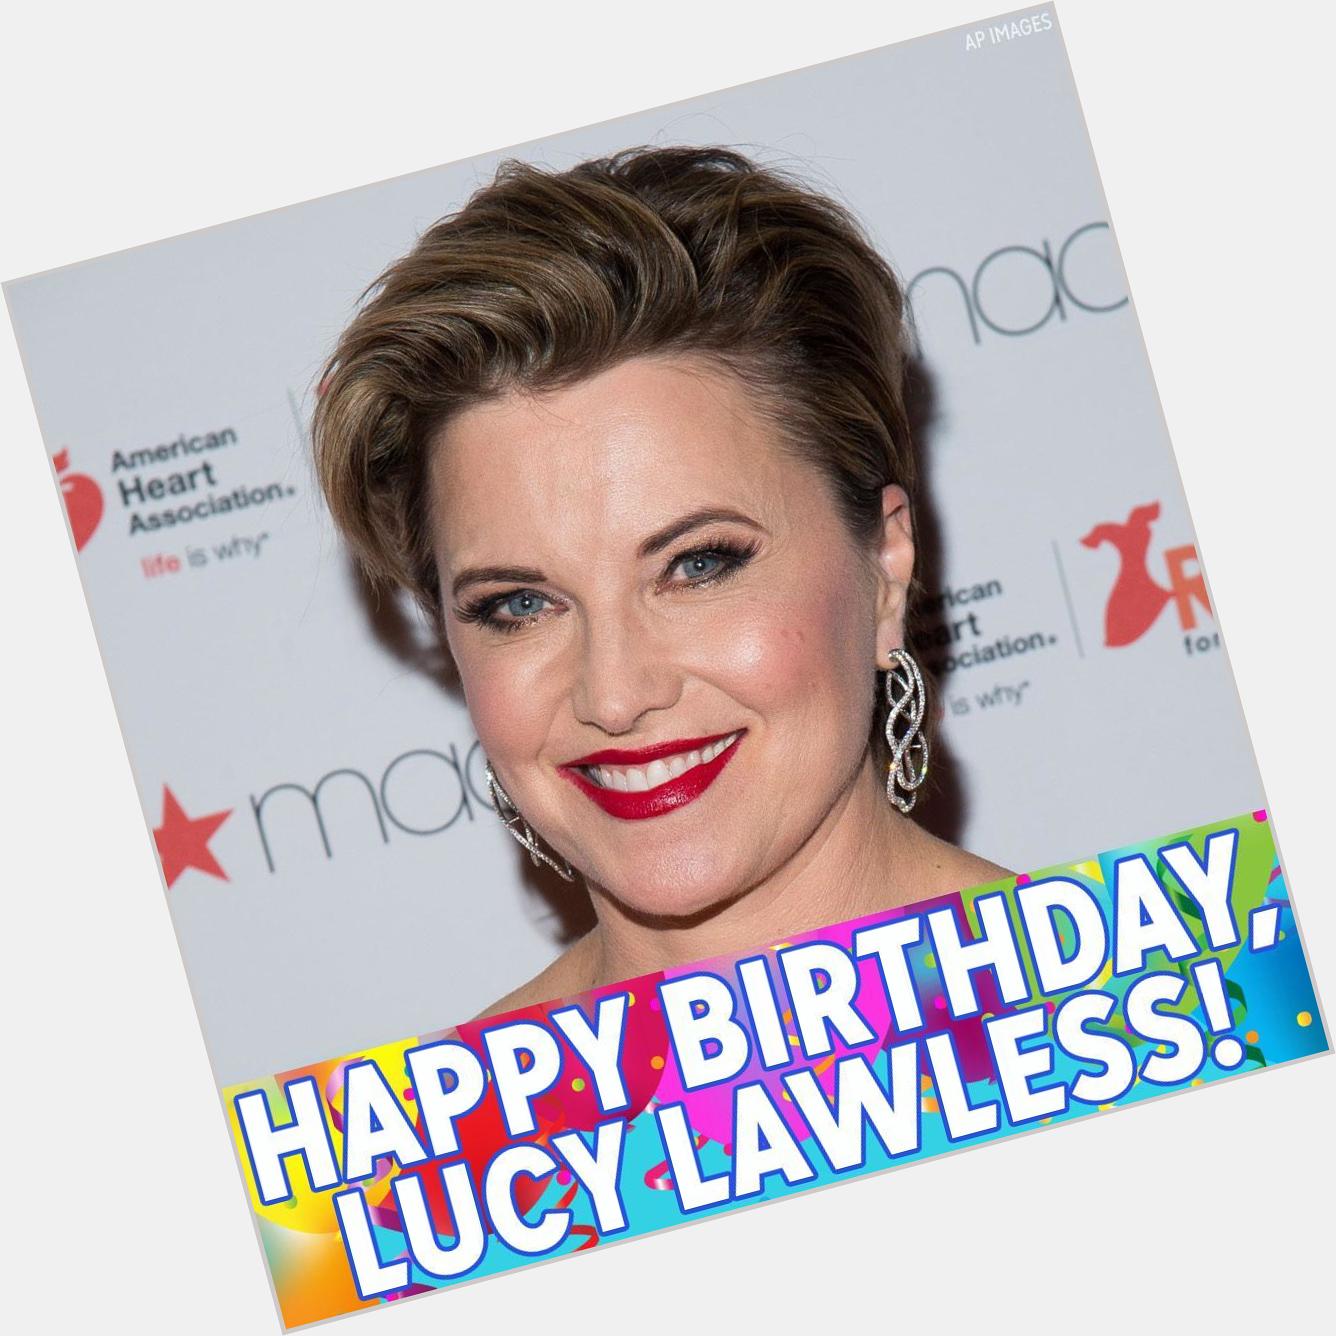 Happy birthday, Lucy Lawless! 